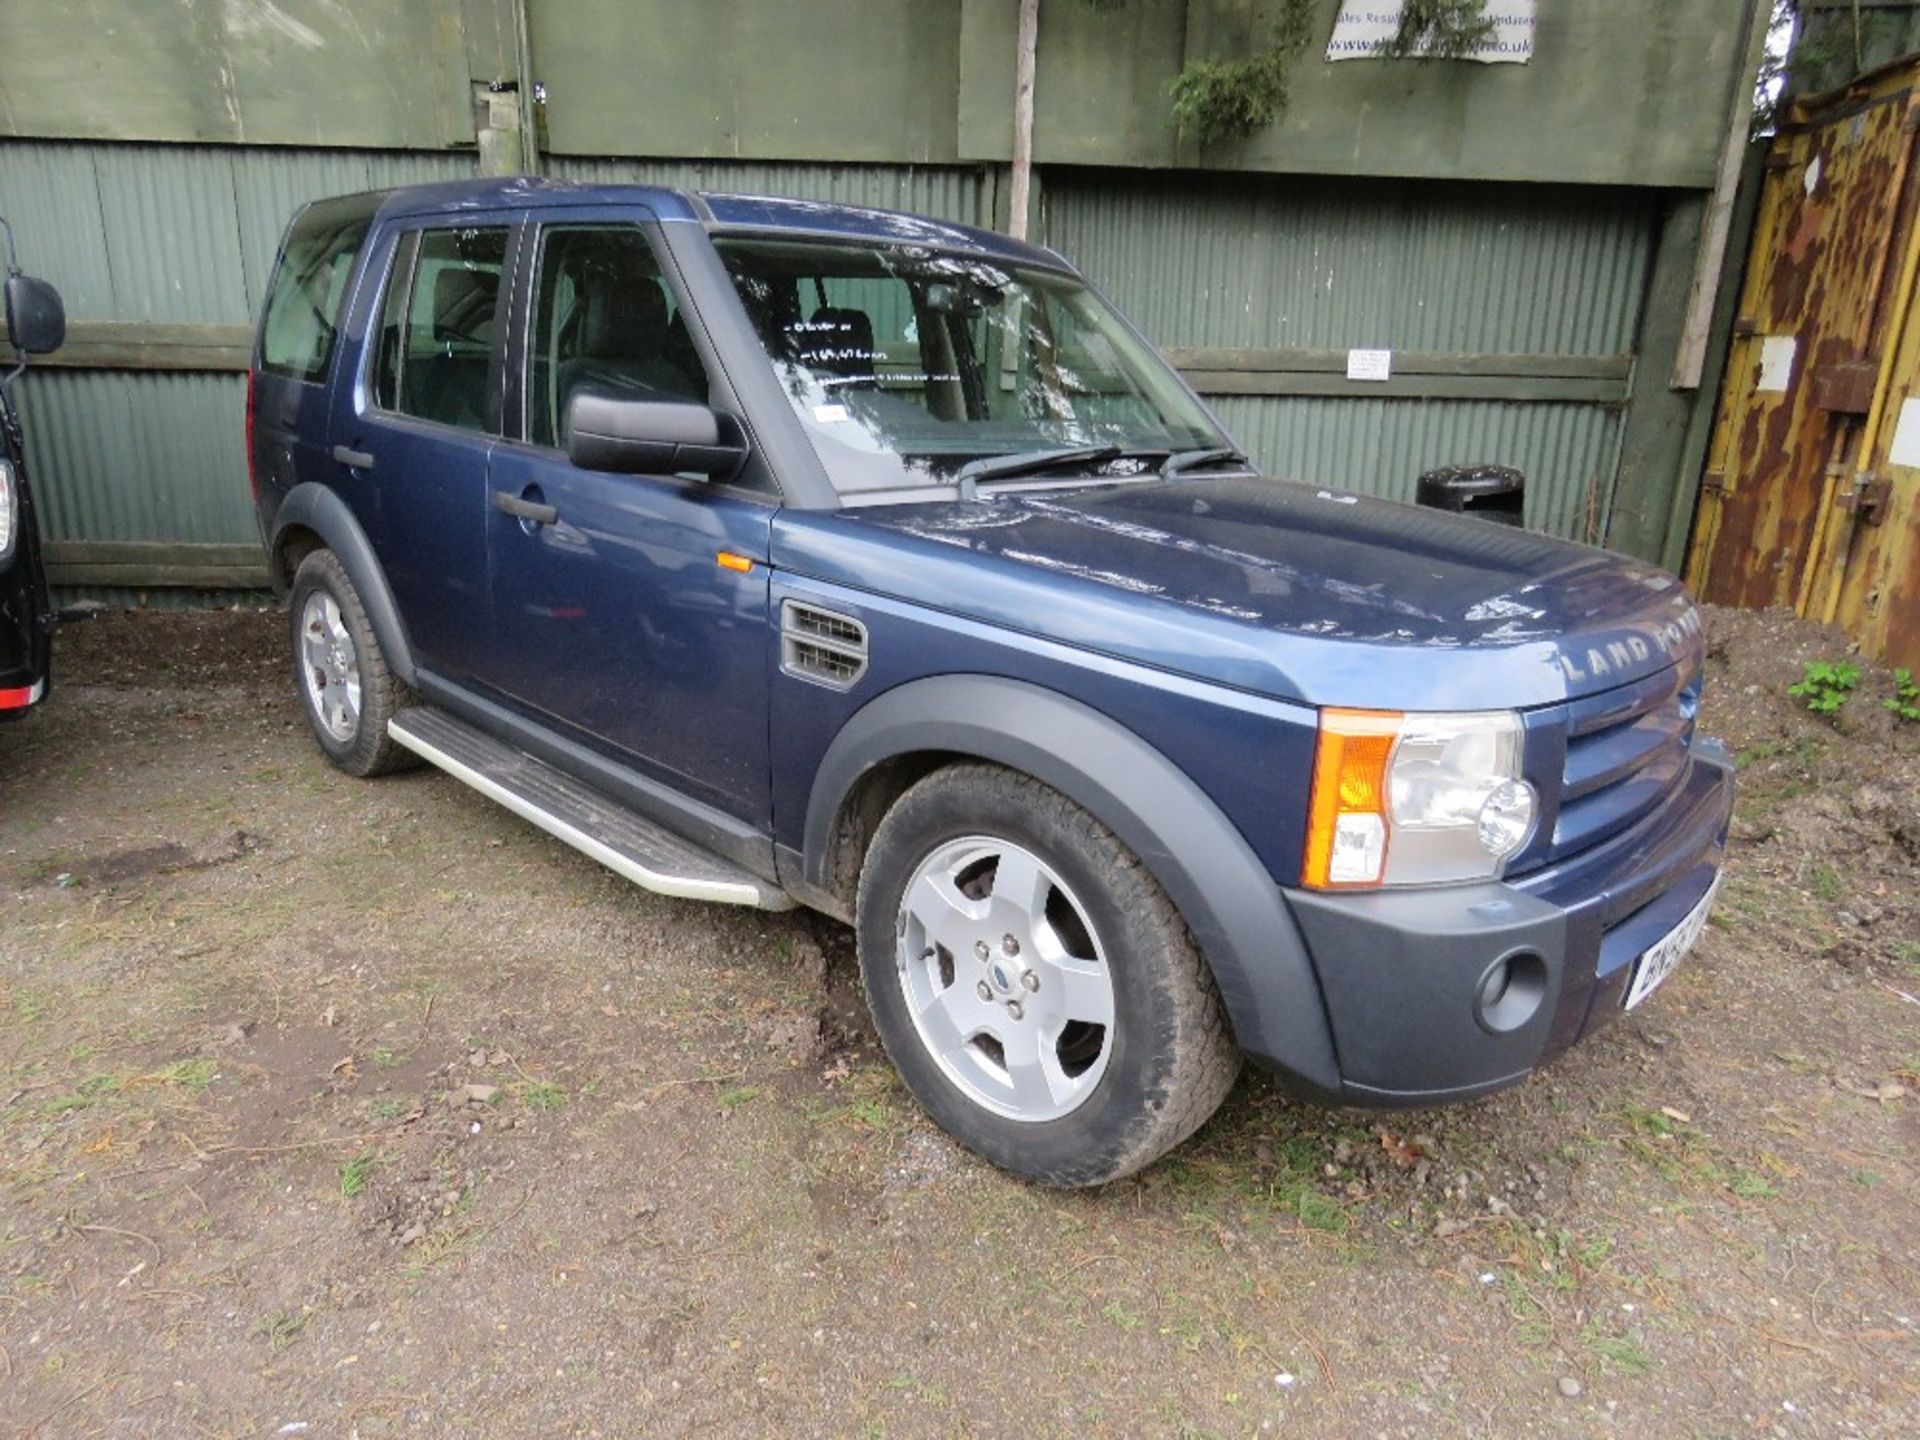 LANDROVER DISCOVERY 3 4X4 CAR, 7 SEATS, AUTOMATIC,